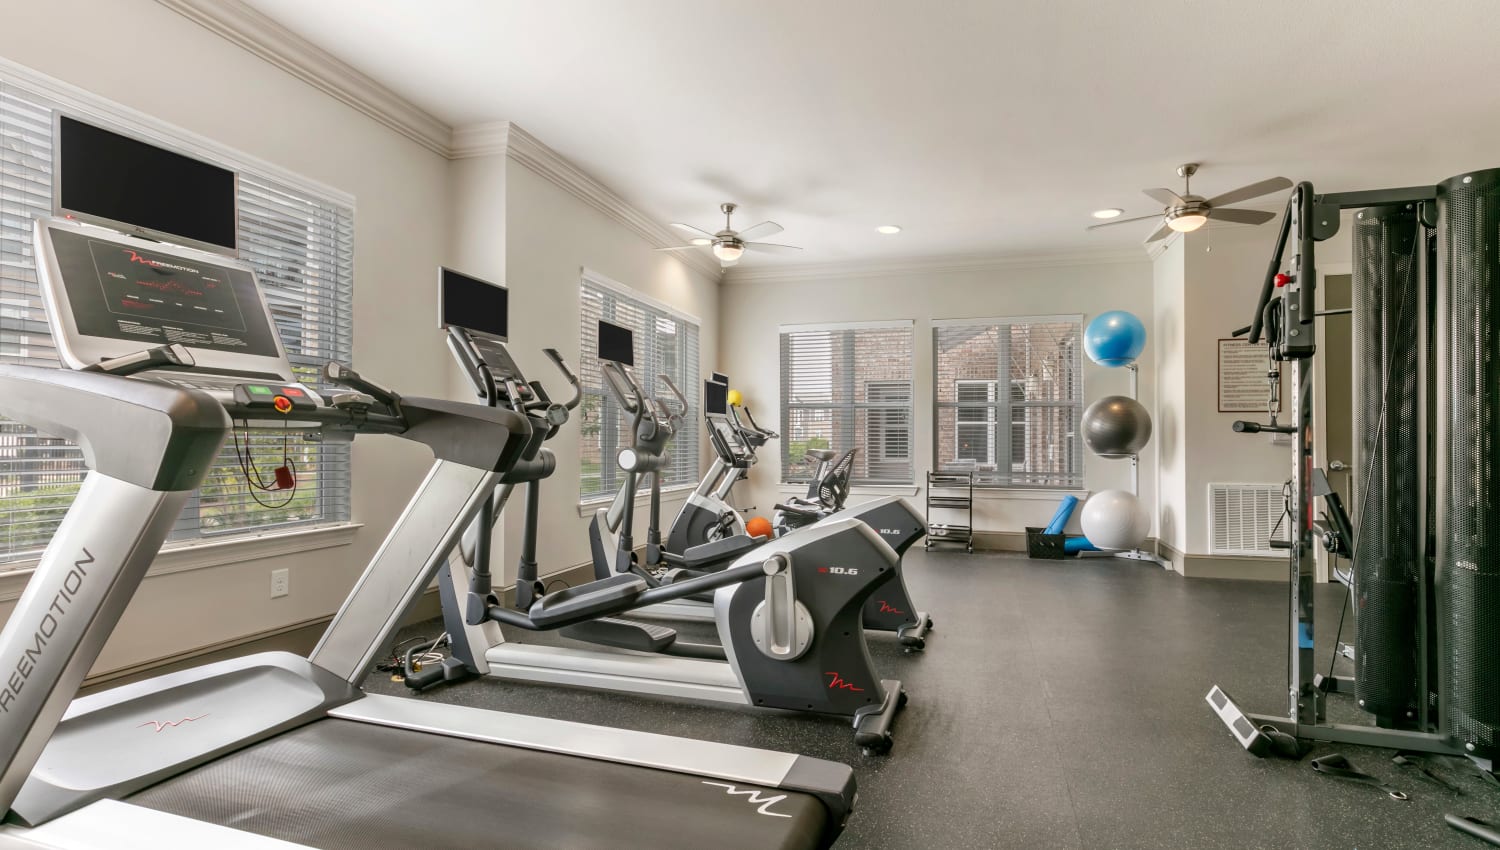 State of the art fitness center at The Village at Apison Pike in Ooltewah, Tennessee